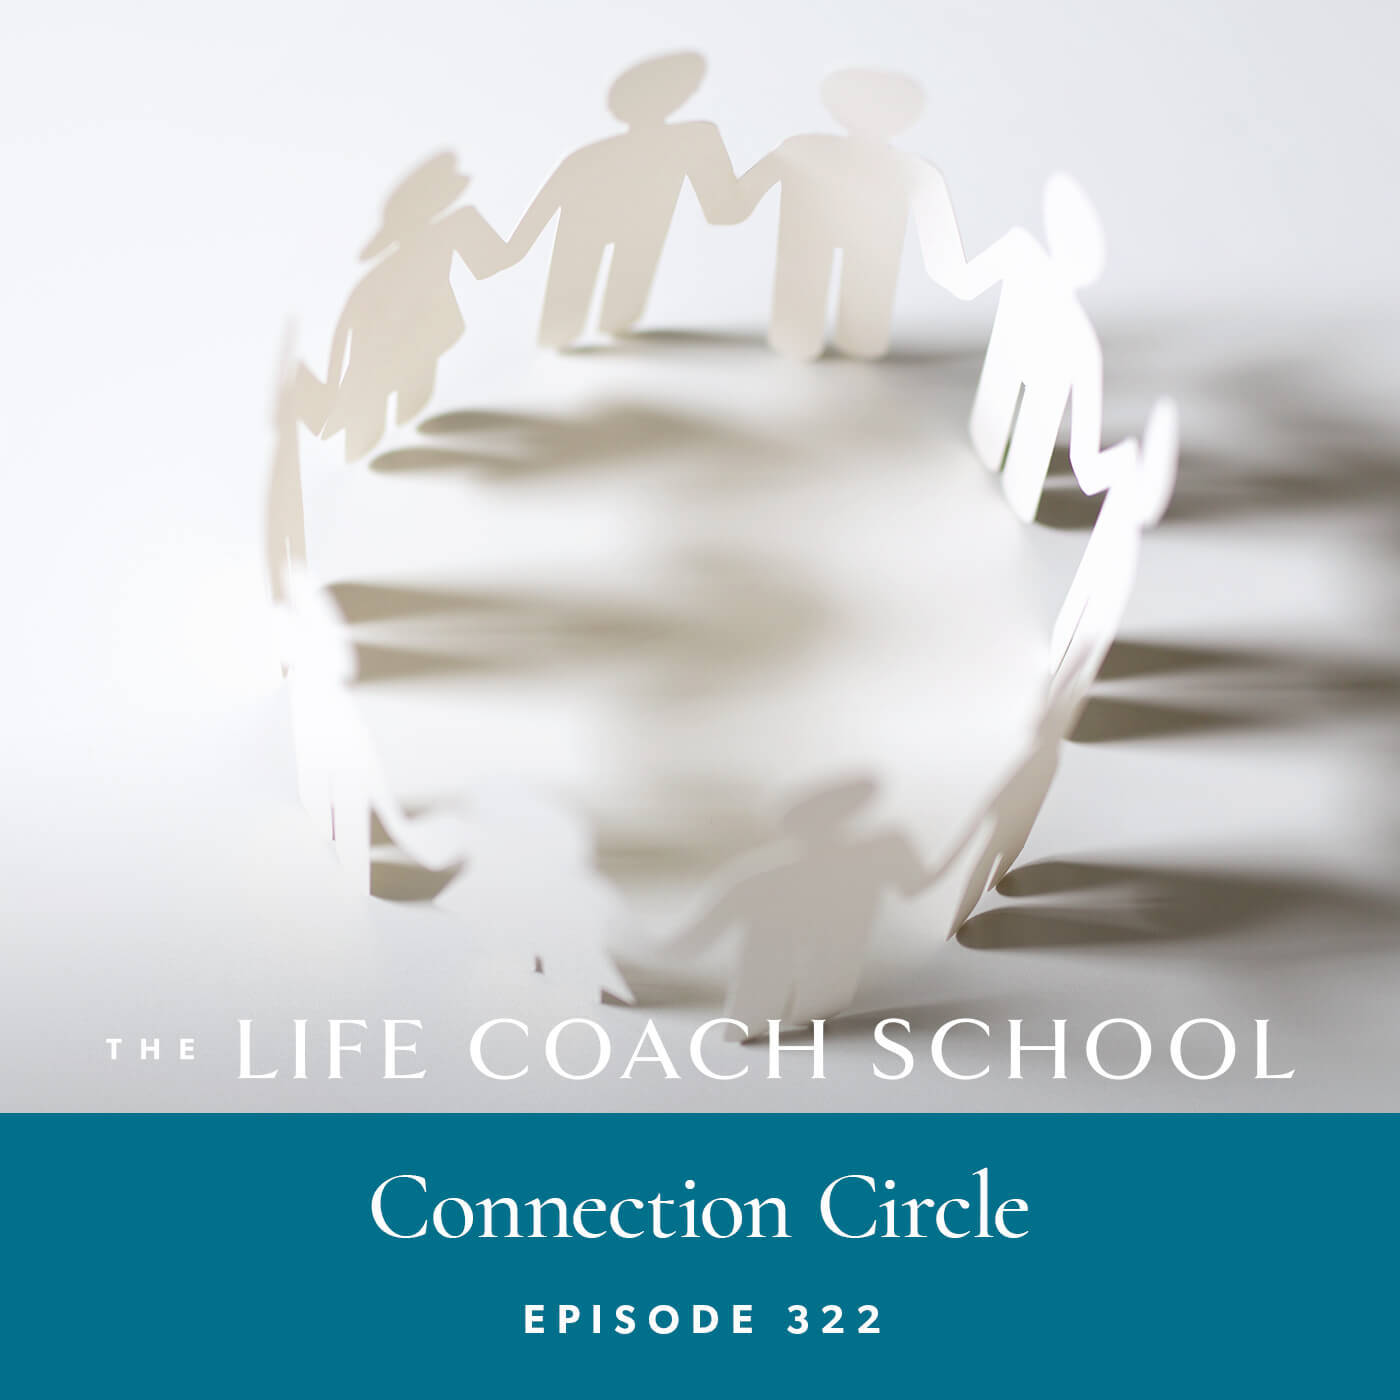 The Life Coach School Podcast with Brooke Castillo | Episode 322 | Connection Circle